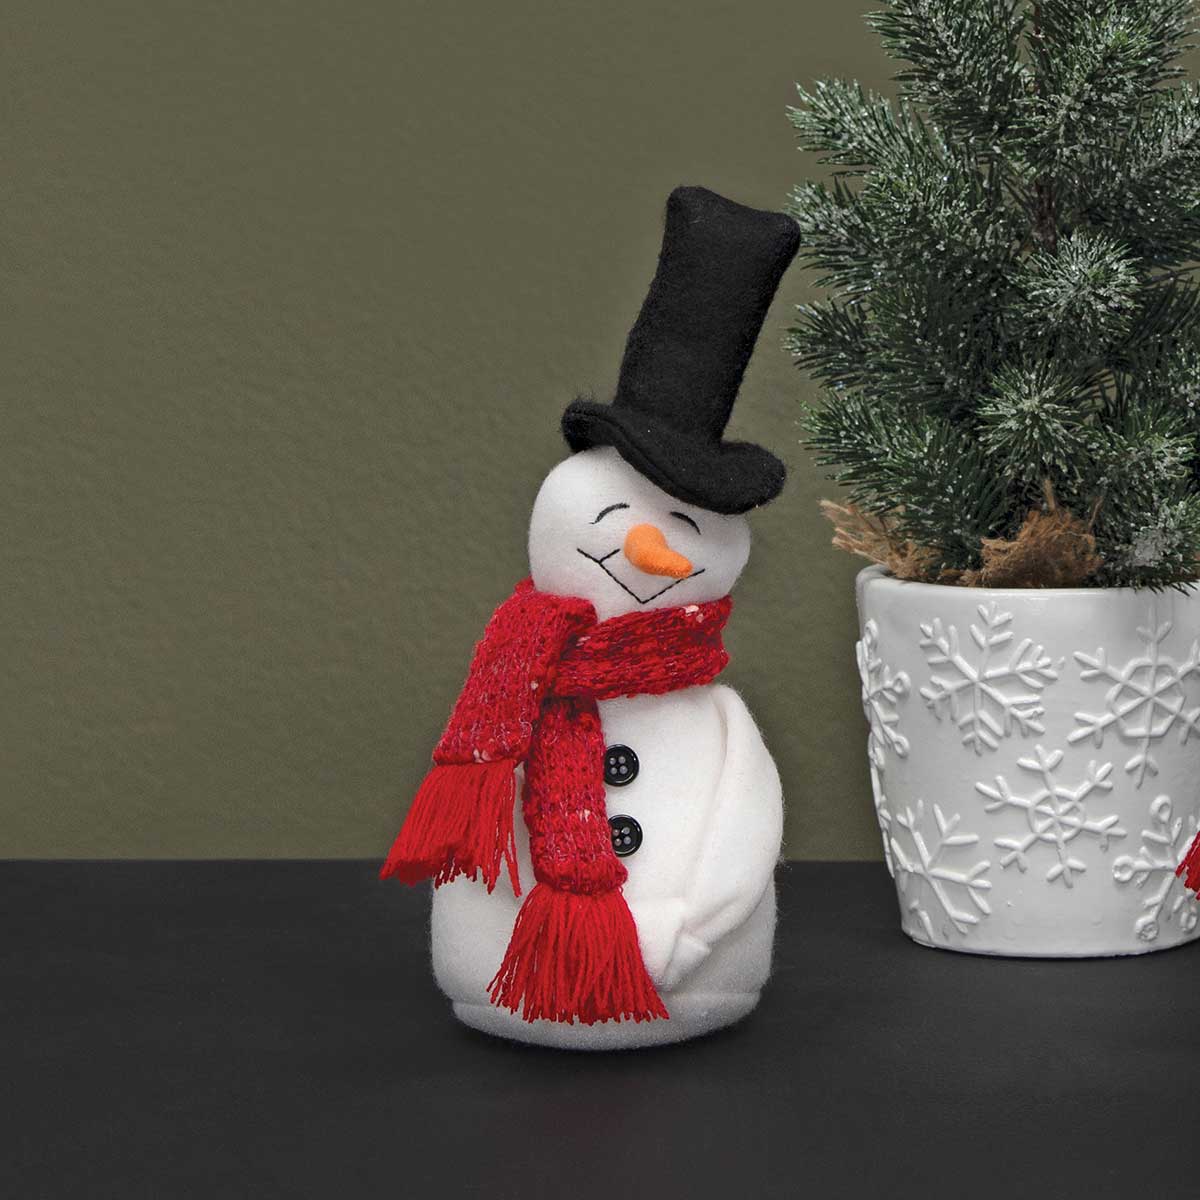 SASSY SIMON SNOWMAN HANDS CLASPED WITH BLACK TOP HAT